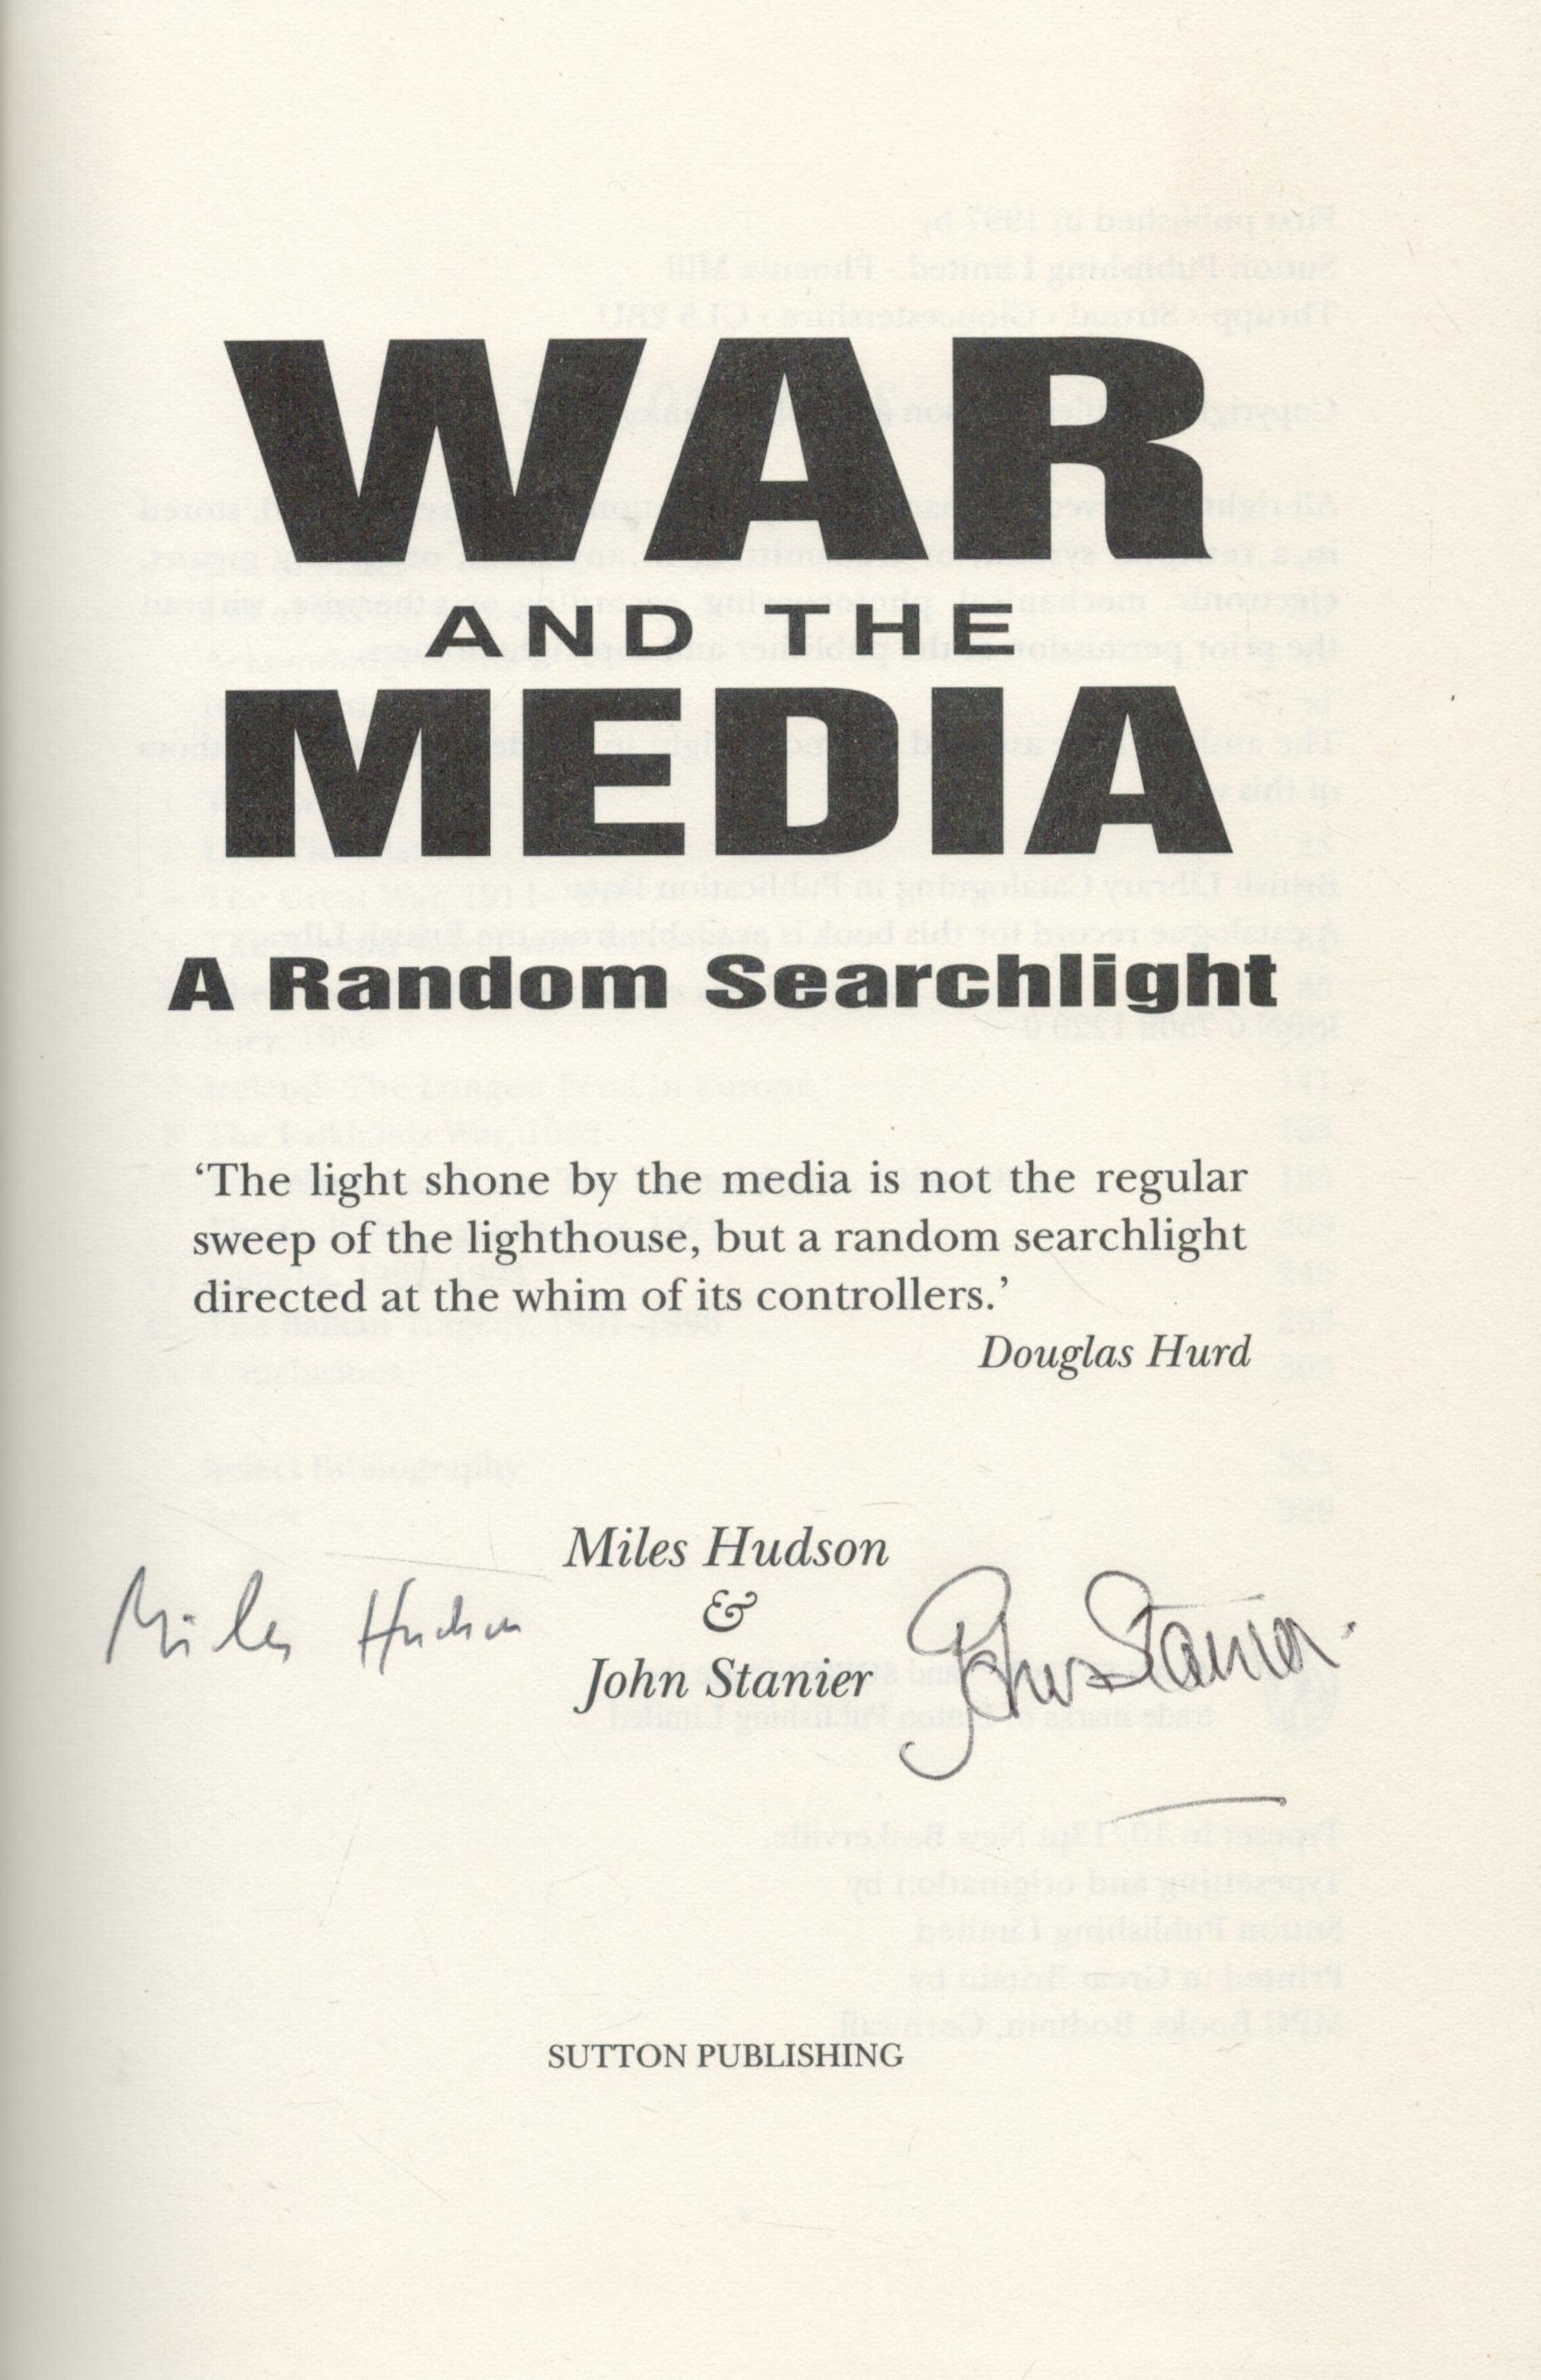 Miles Hudson and John Stainer Signed Book War and the Media 1997 First Edition Hardback Book with - Image 2 of 3